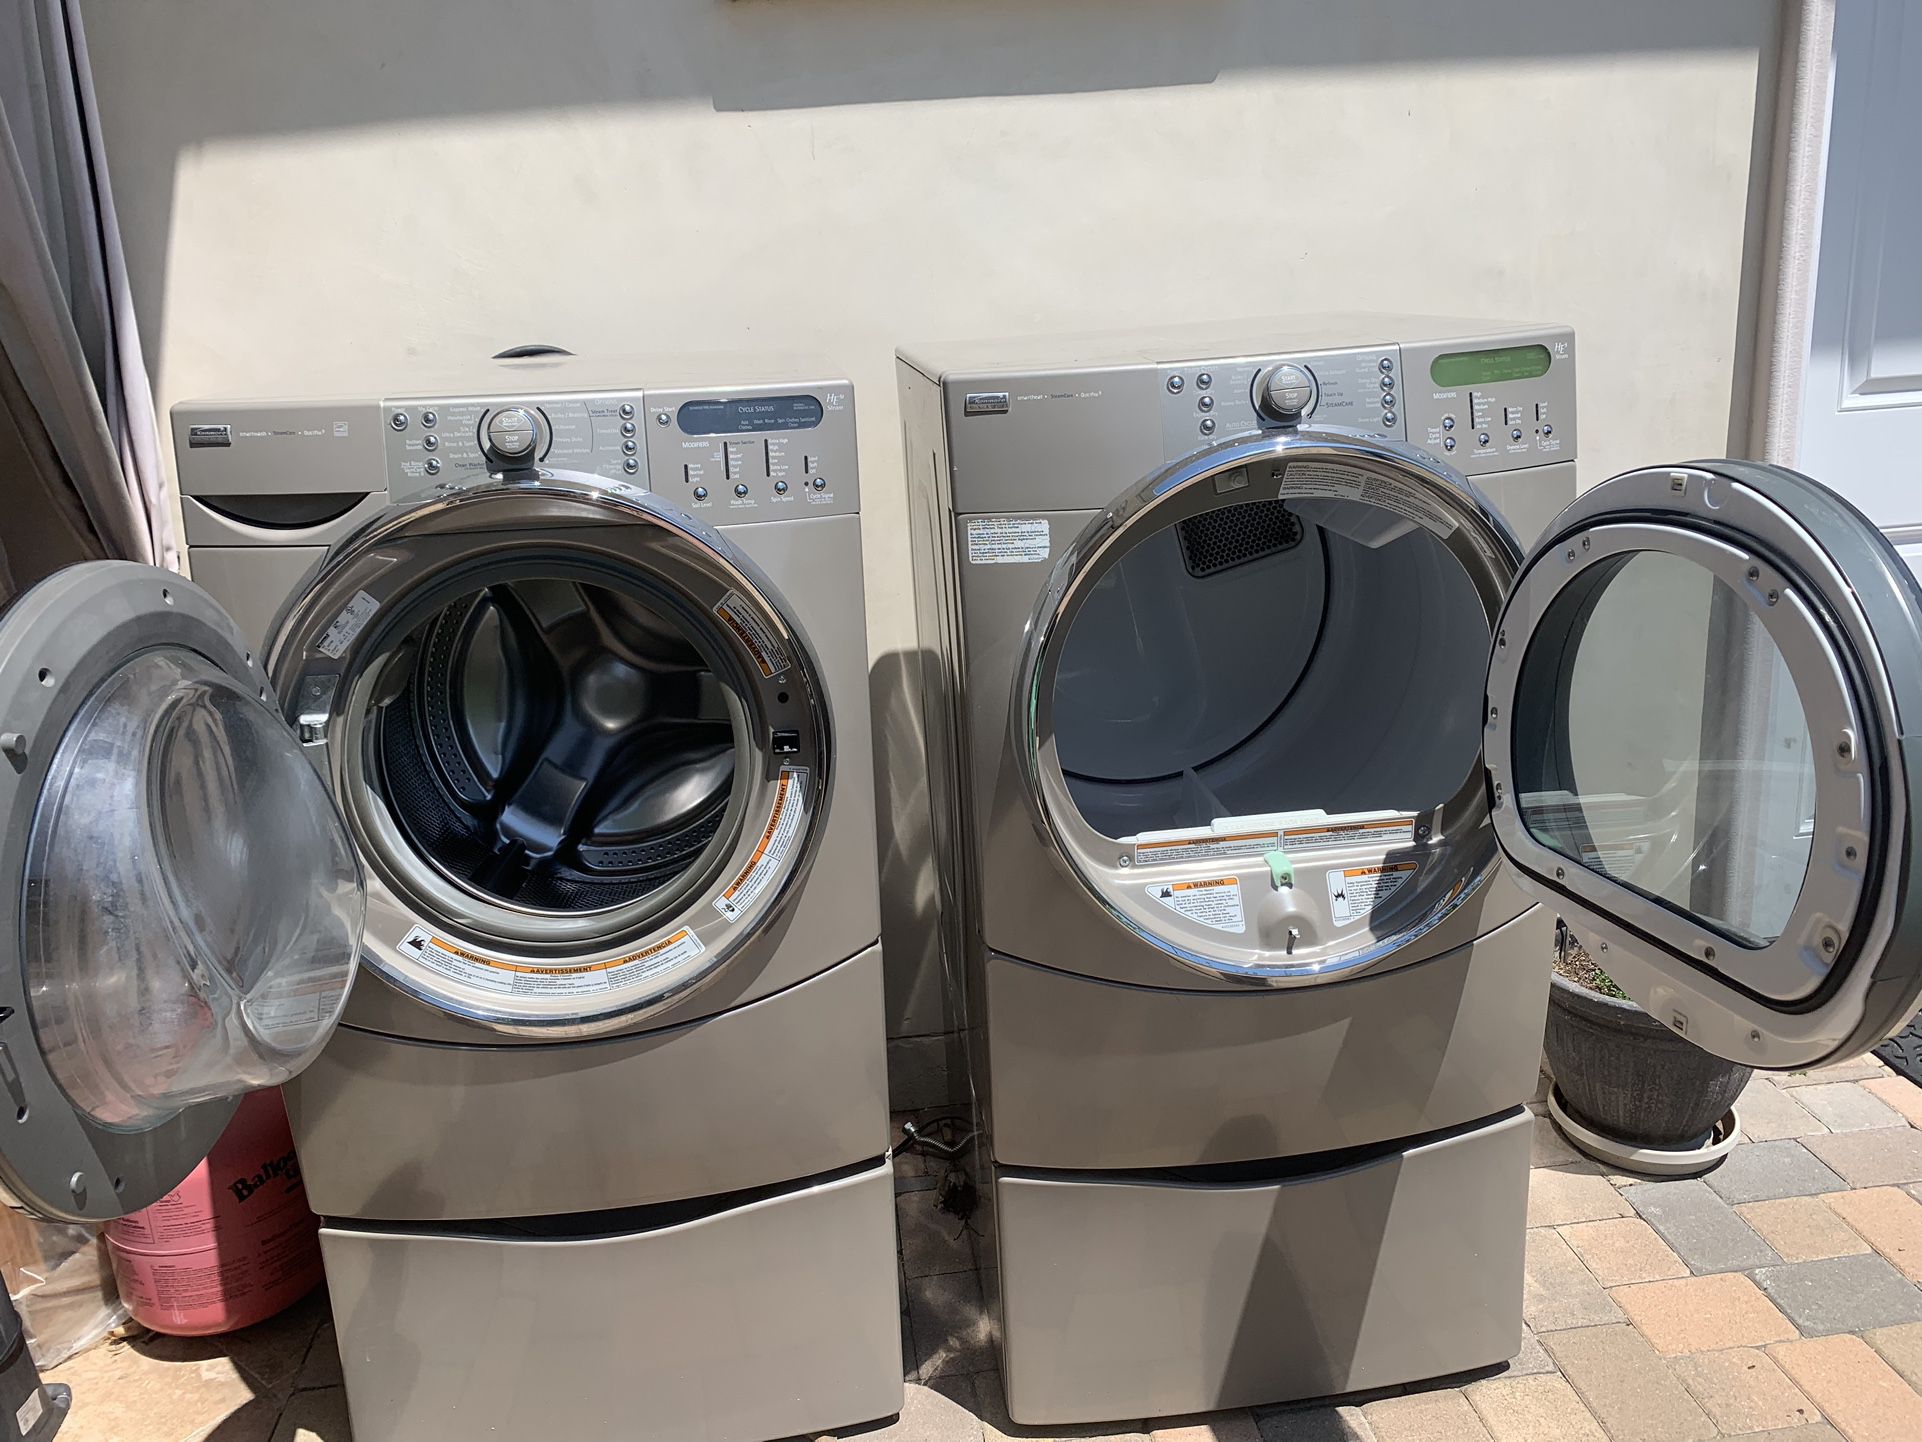 Kenmore Washer And Dryer (pedestal Included) 